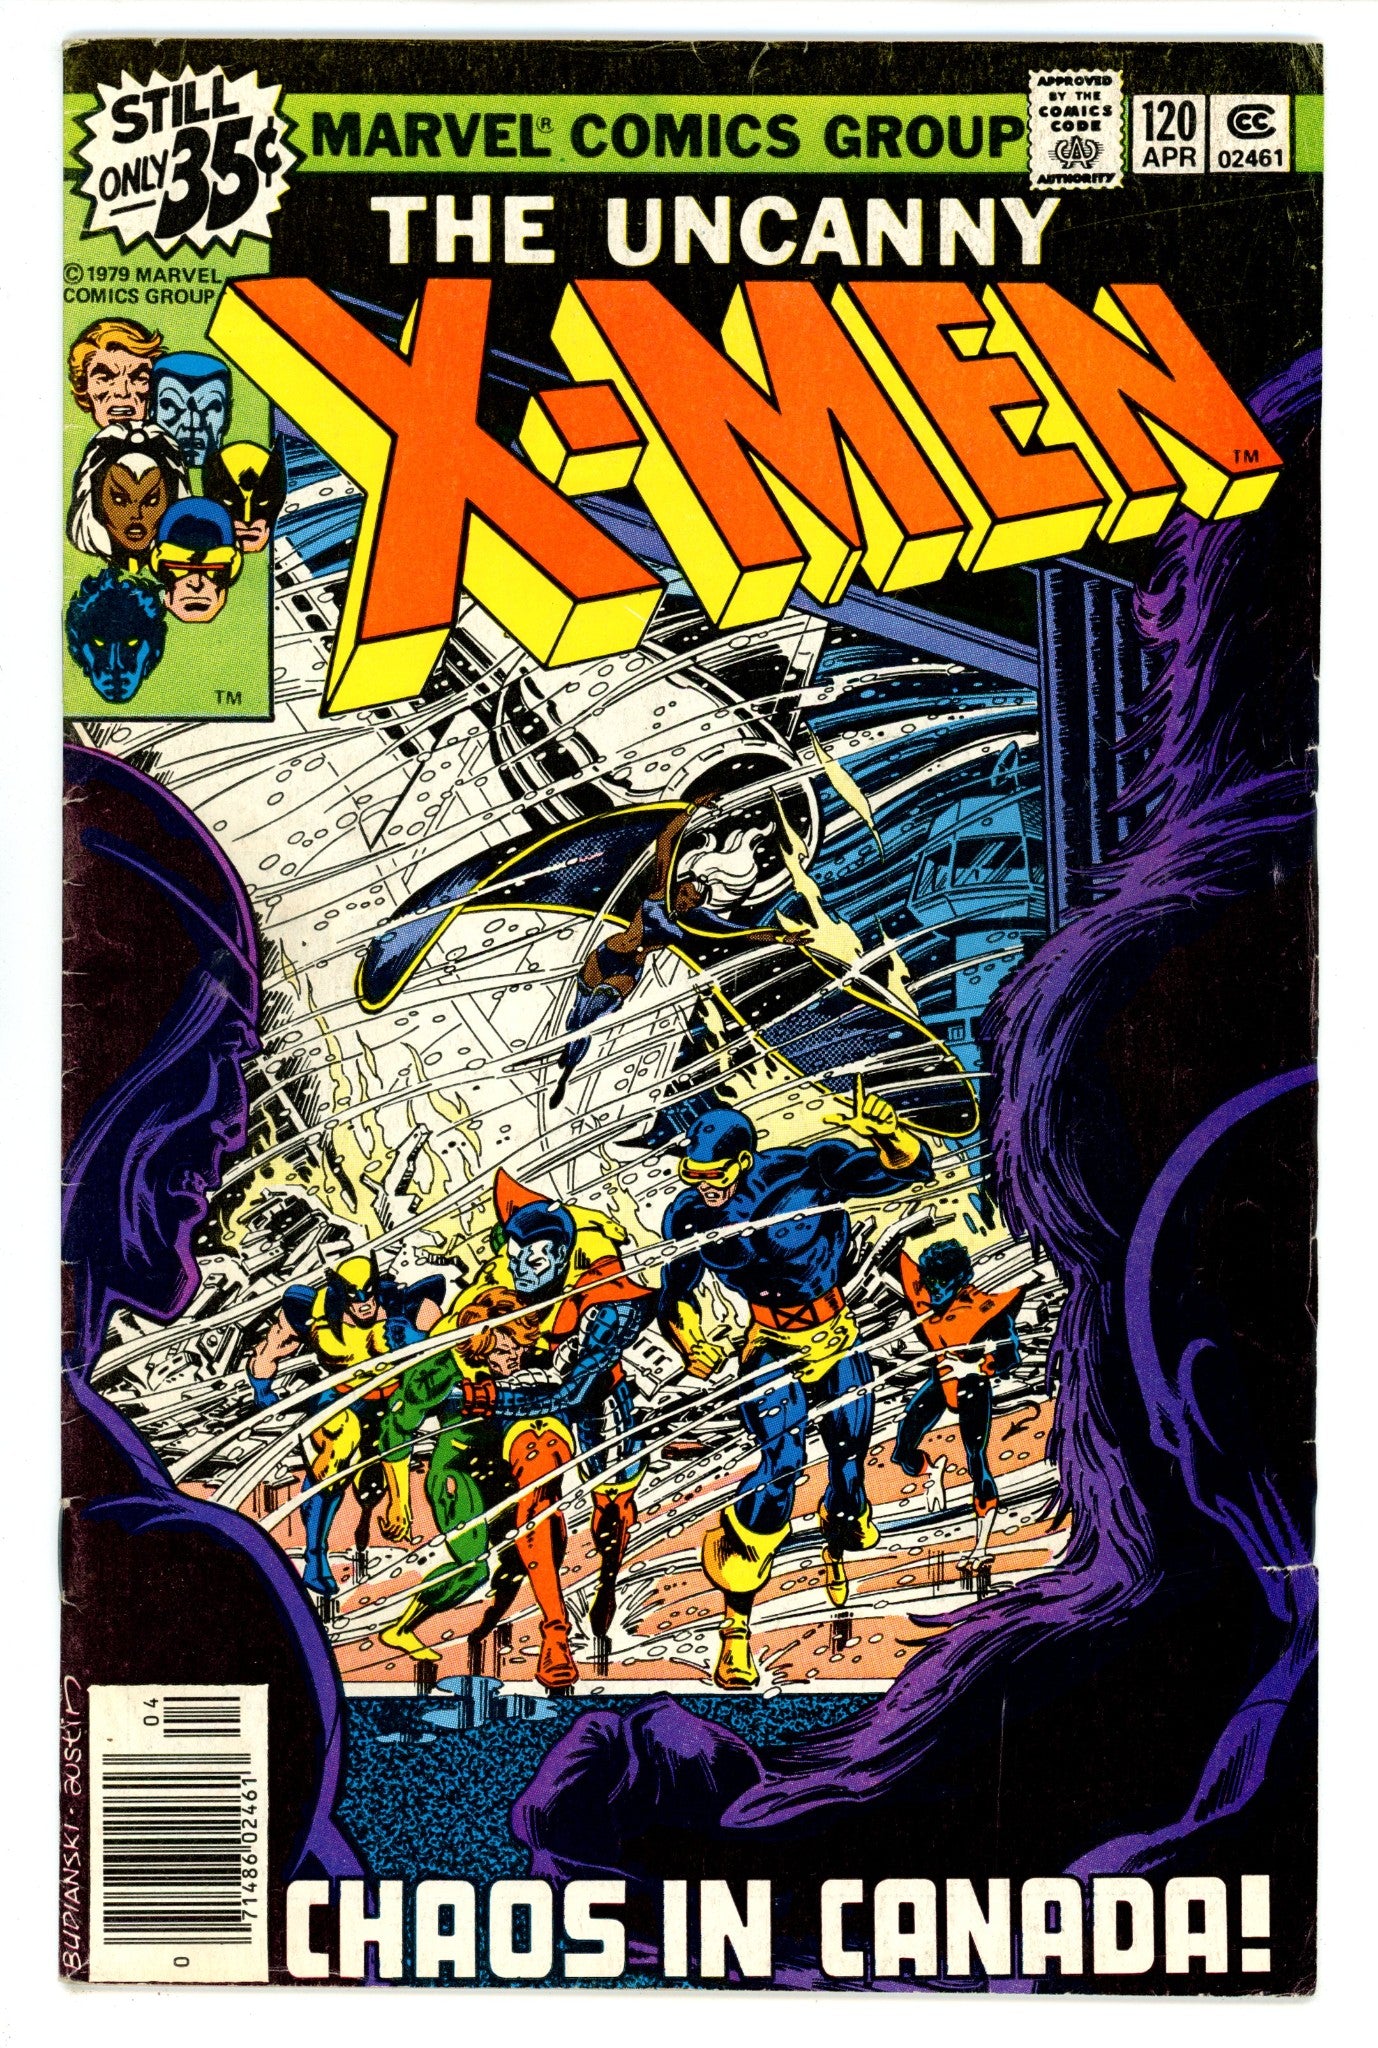 The X-Men Vol 1 120 VG/FN (5.0) (1979) Signed x1 1st Page Terry Austin 